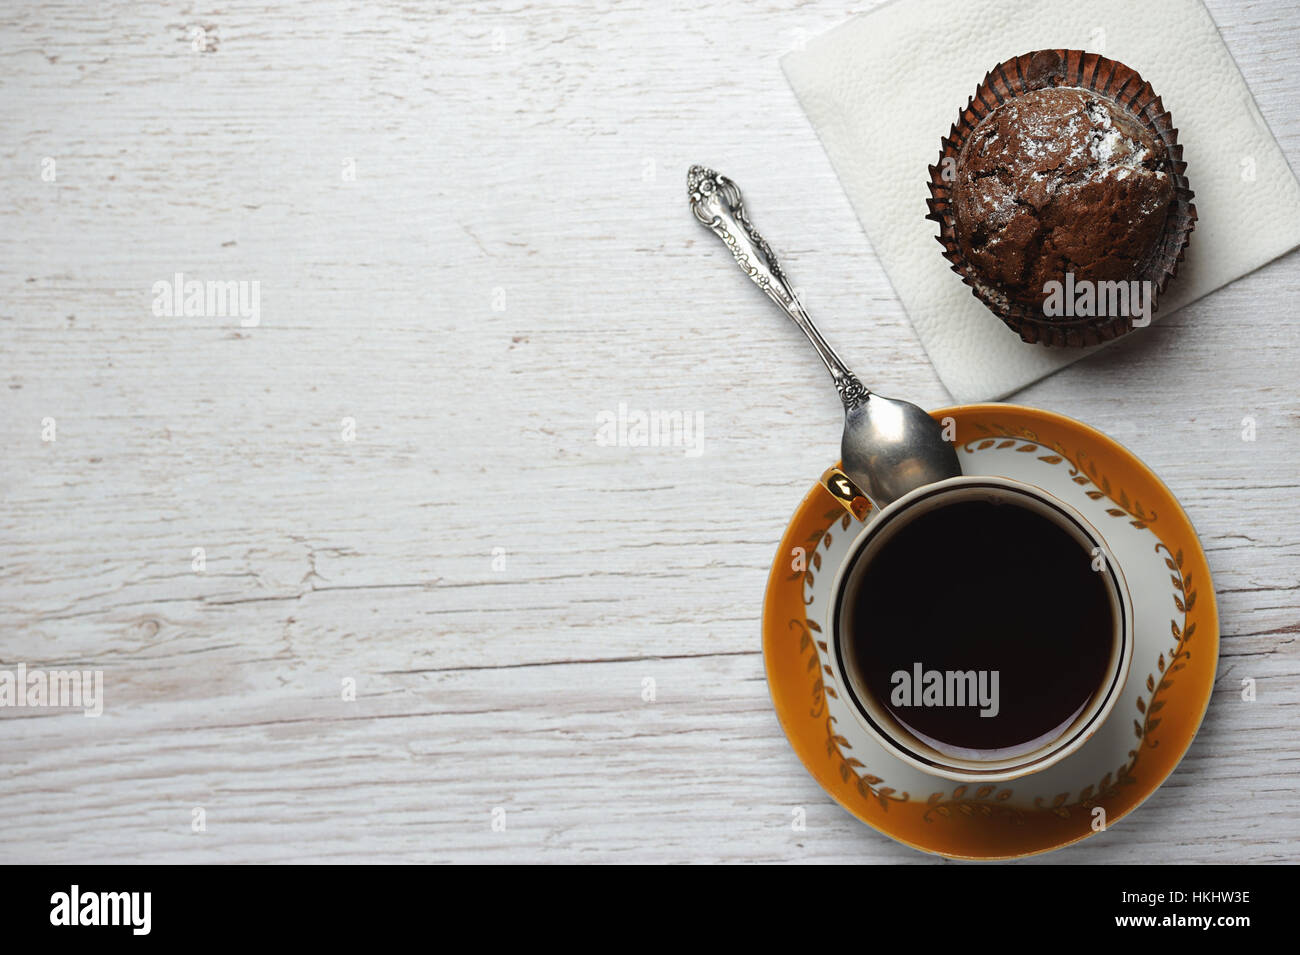 black tea with cup cake on wood table Stock Photo